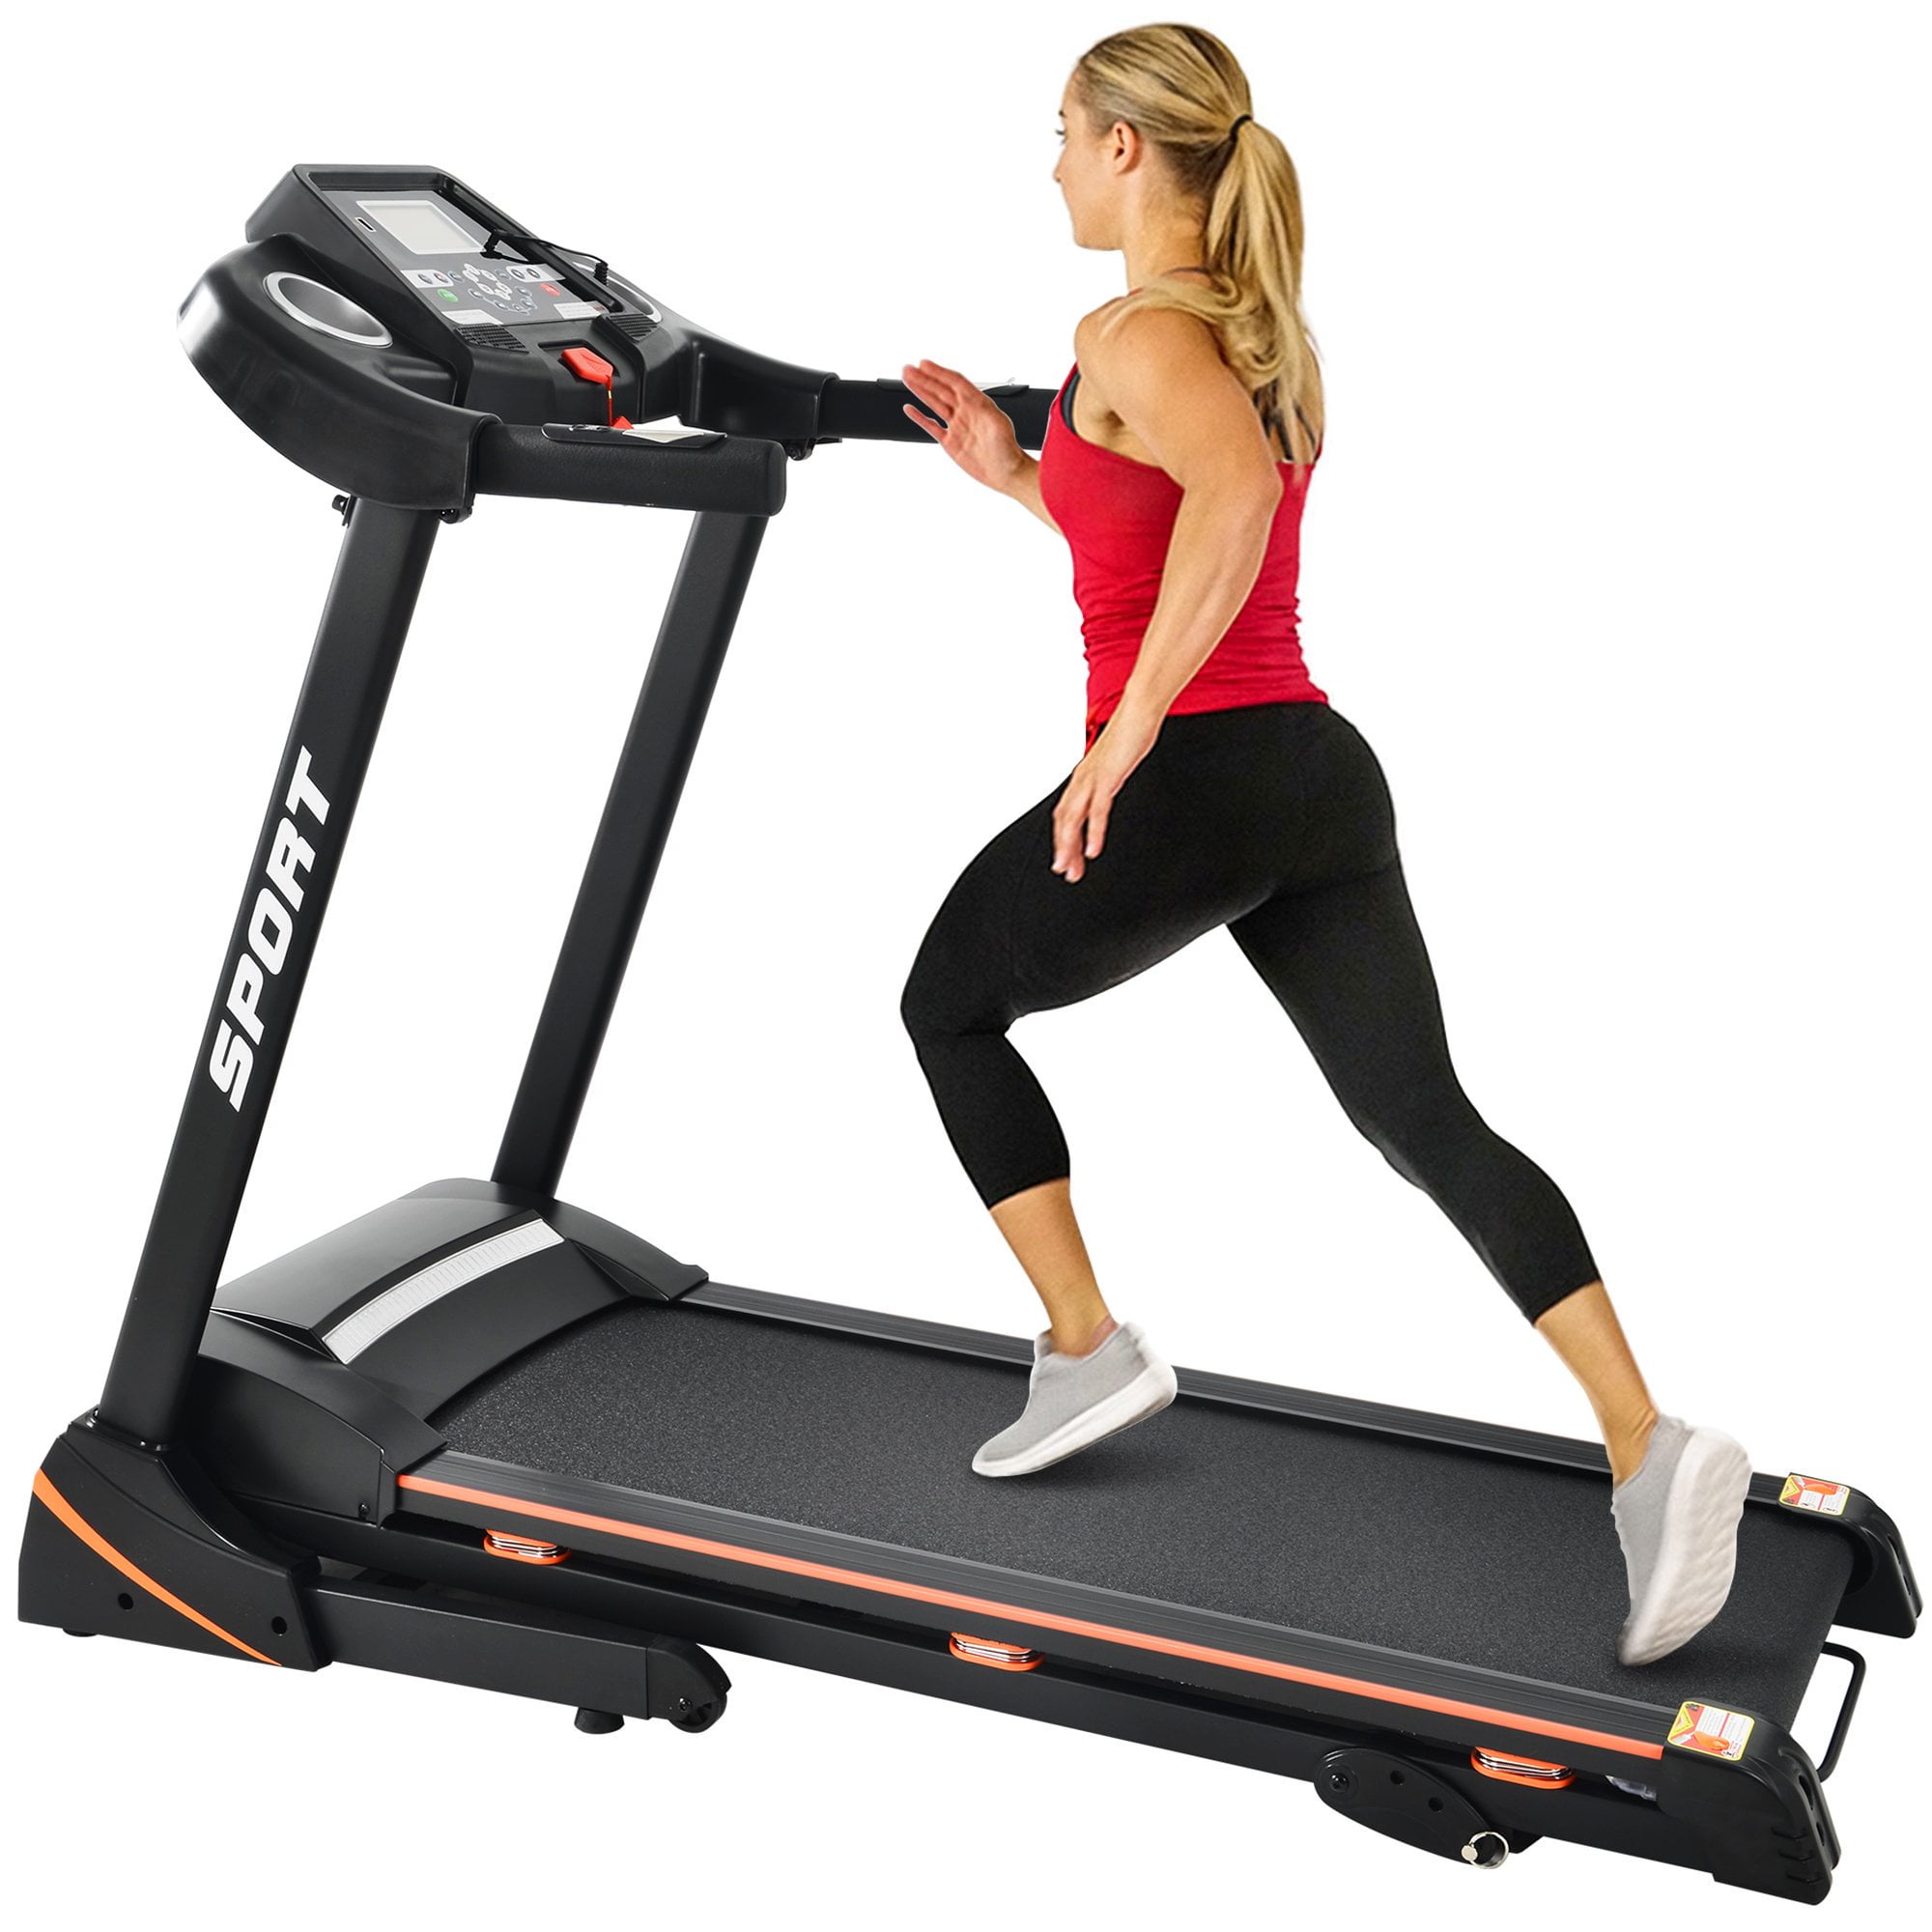 Treadmill Electric Motorized Folding 1.5HP Running Gym Power Machine Home Office 